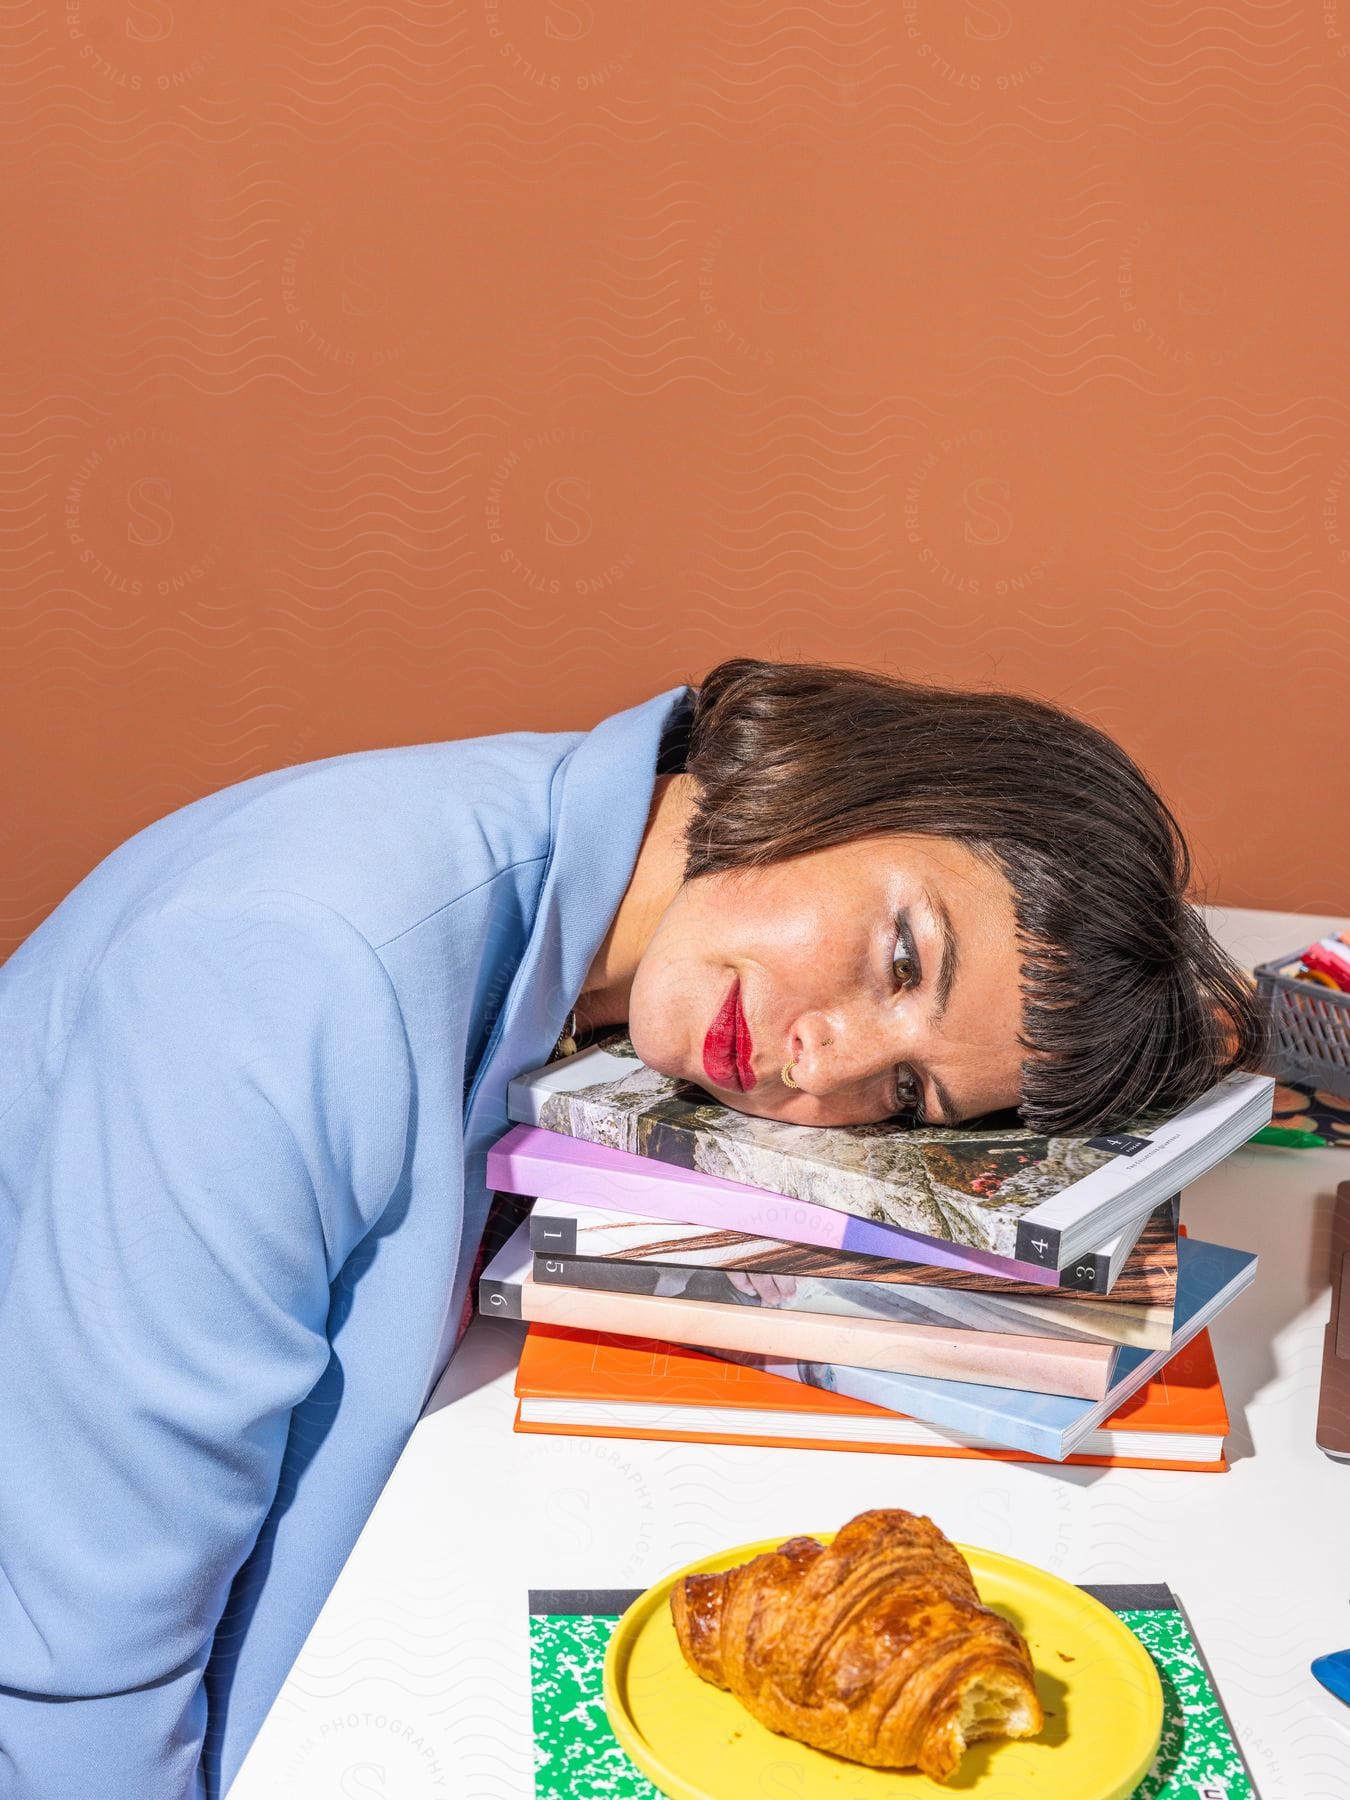 A woman sitting at a desk is resting her head on books looking at a pastry on a plate